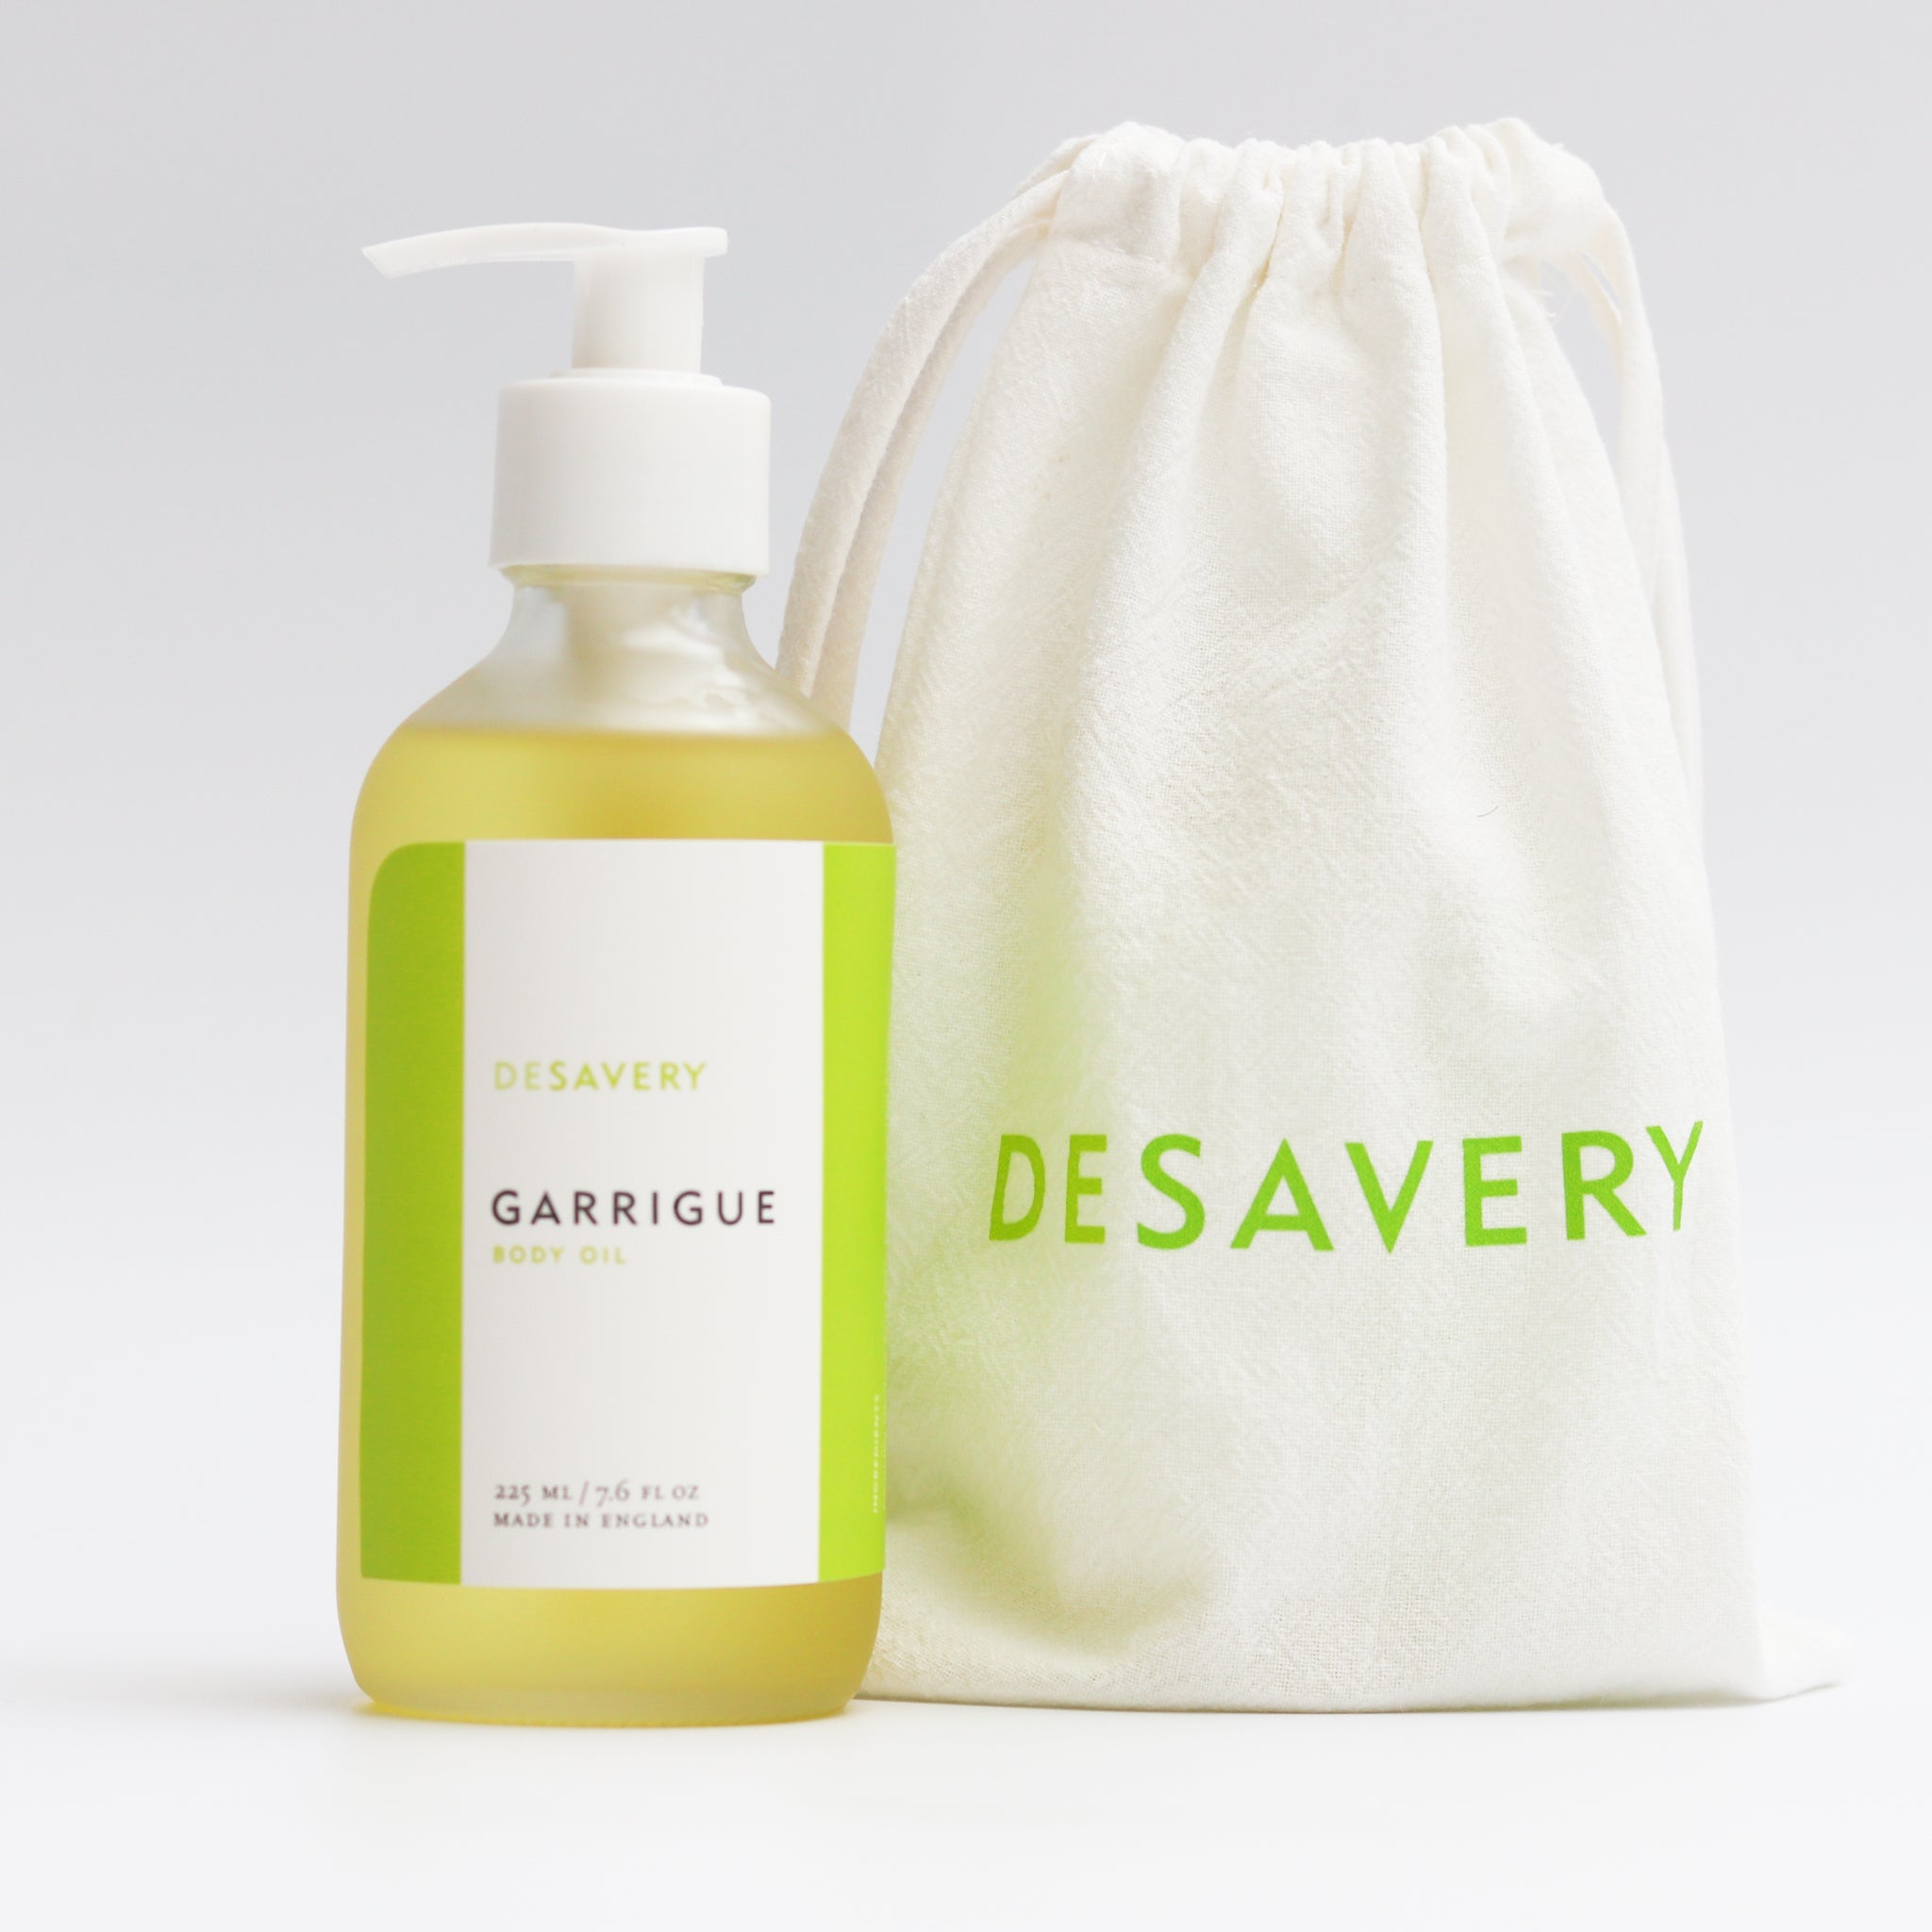 Large Desavery Garrigue Body oil. 225ml glass bottle with white treatment pump. The product comes in a drawstring cotton linen bag to keep the bottle clean and pristine. 